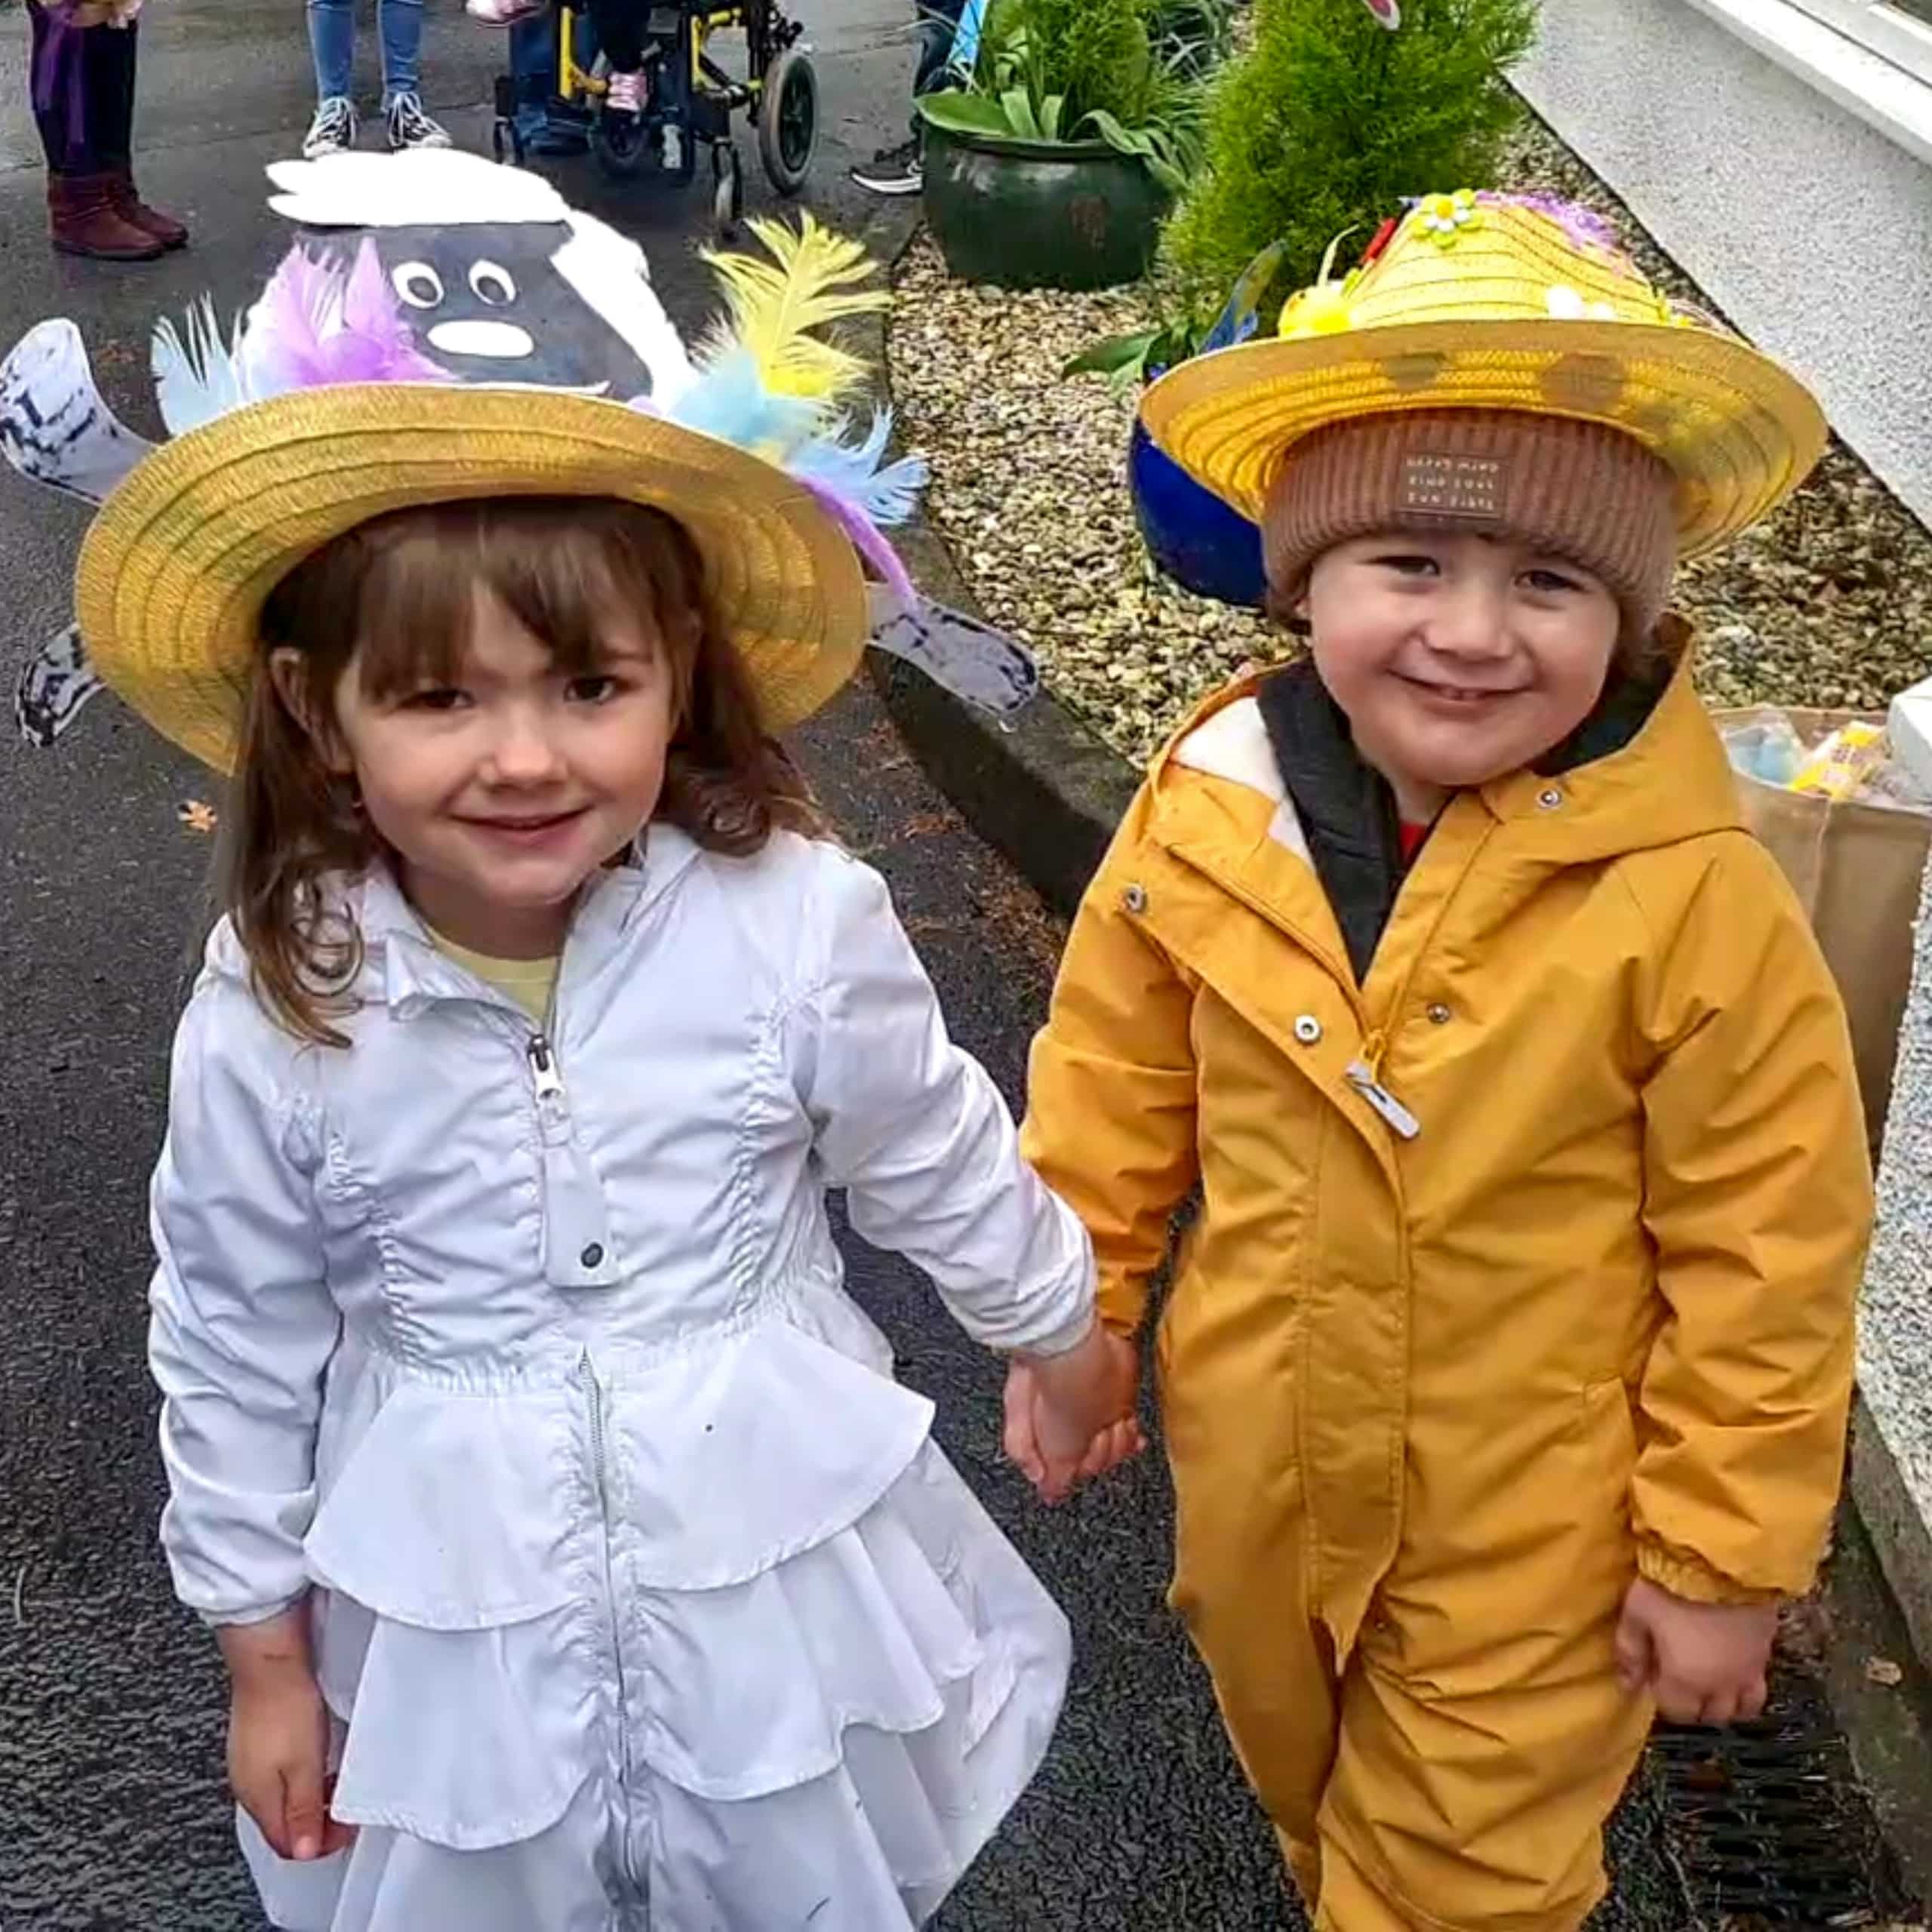 Two local children take part in Avonbridge Care Home's Easter Bonnet parade. One bonnet decorated with a cartoon lamb, the other with chicks.